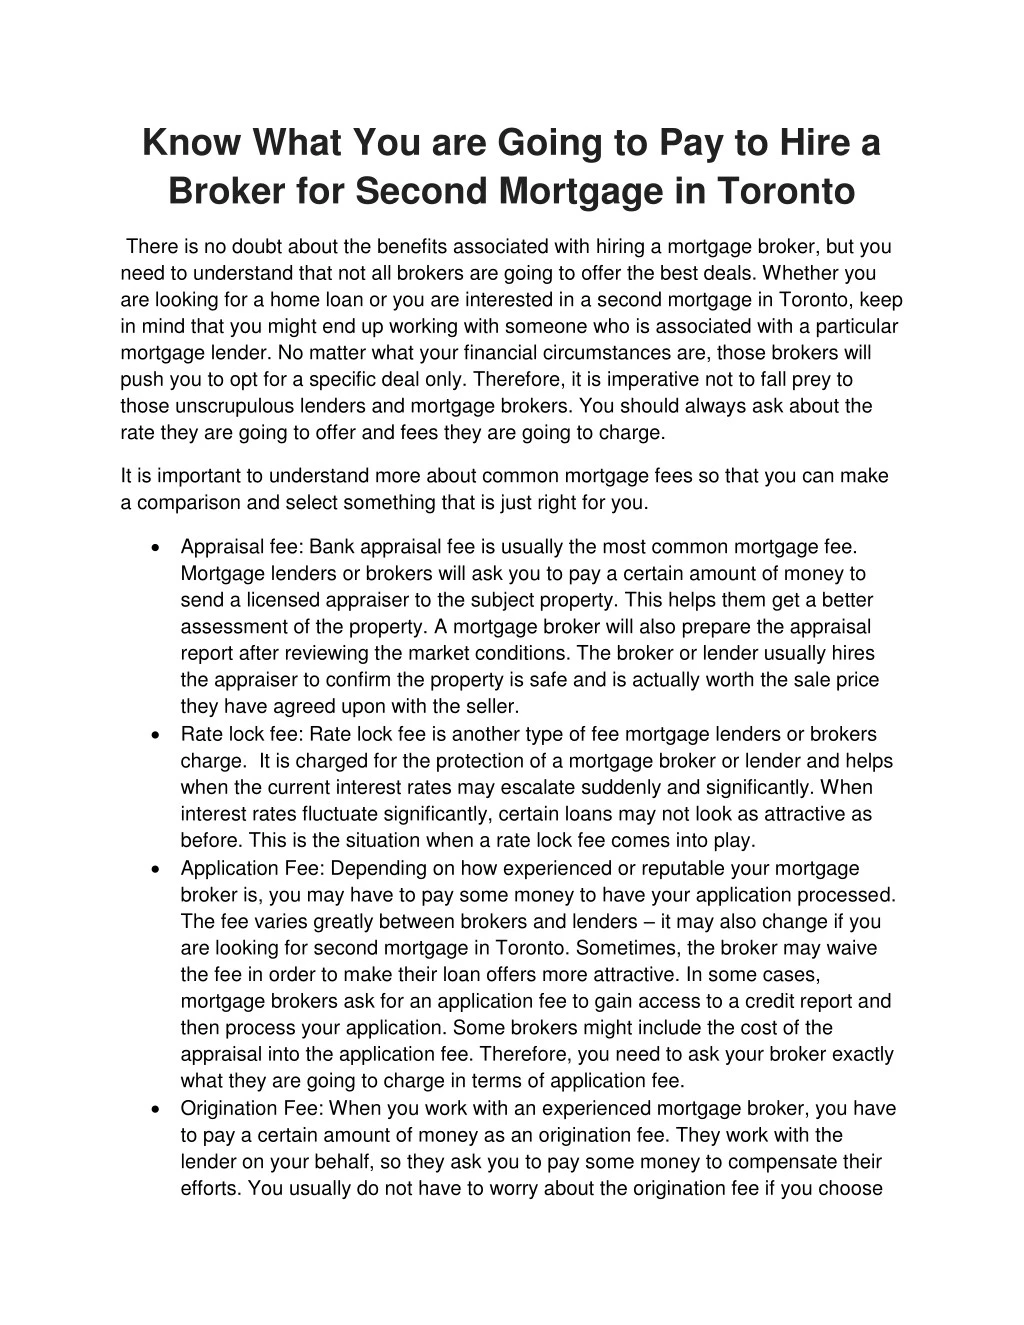 know what you are going to pay to hire a broker